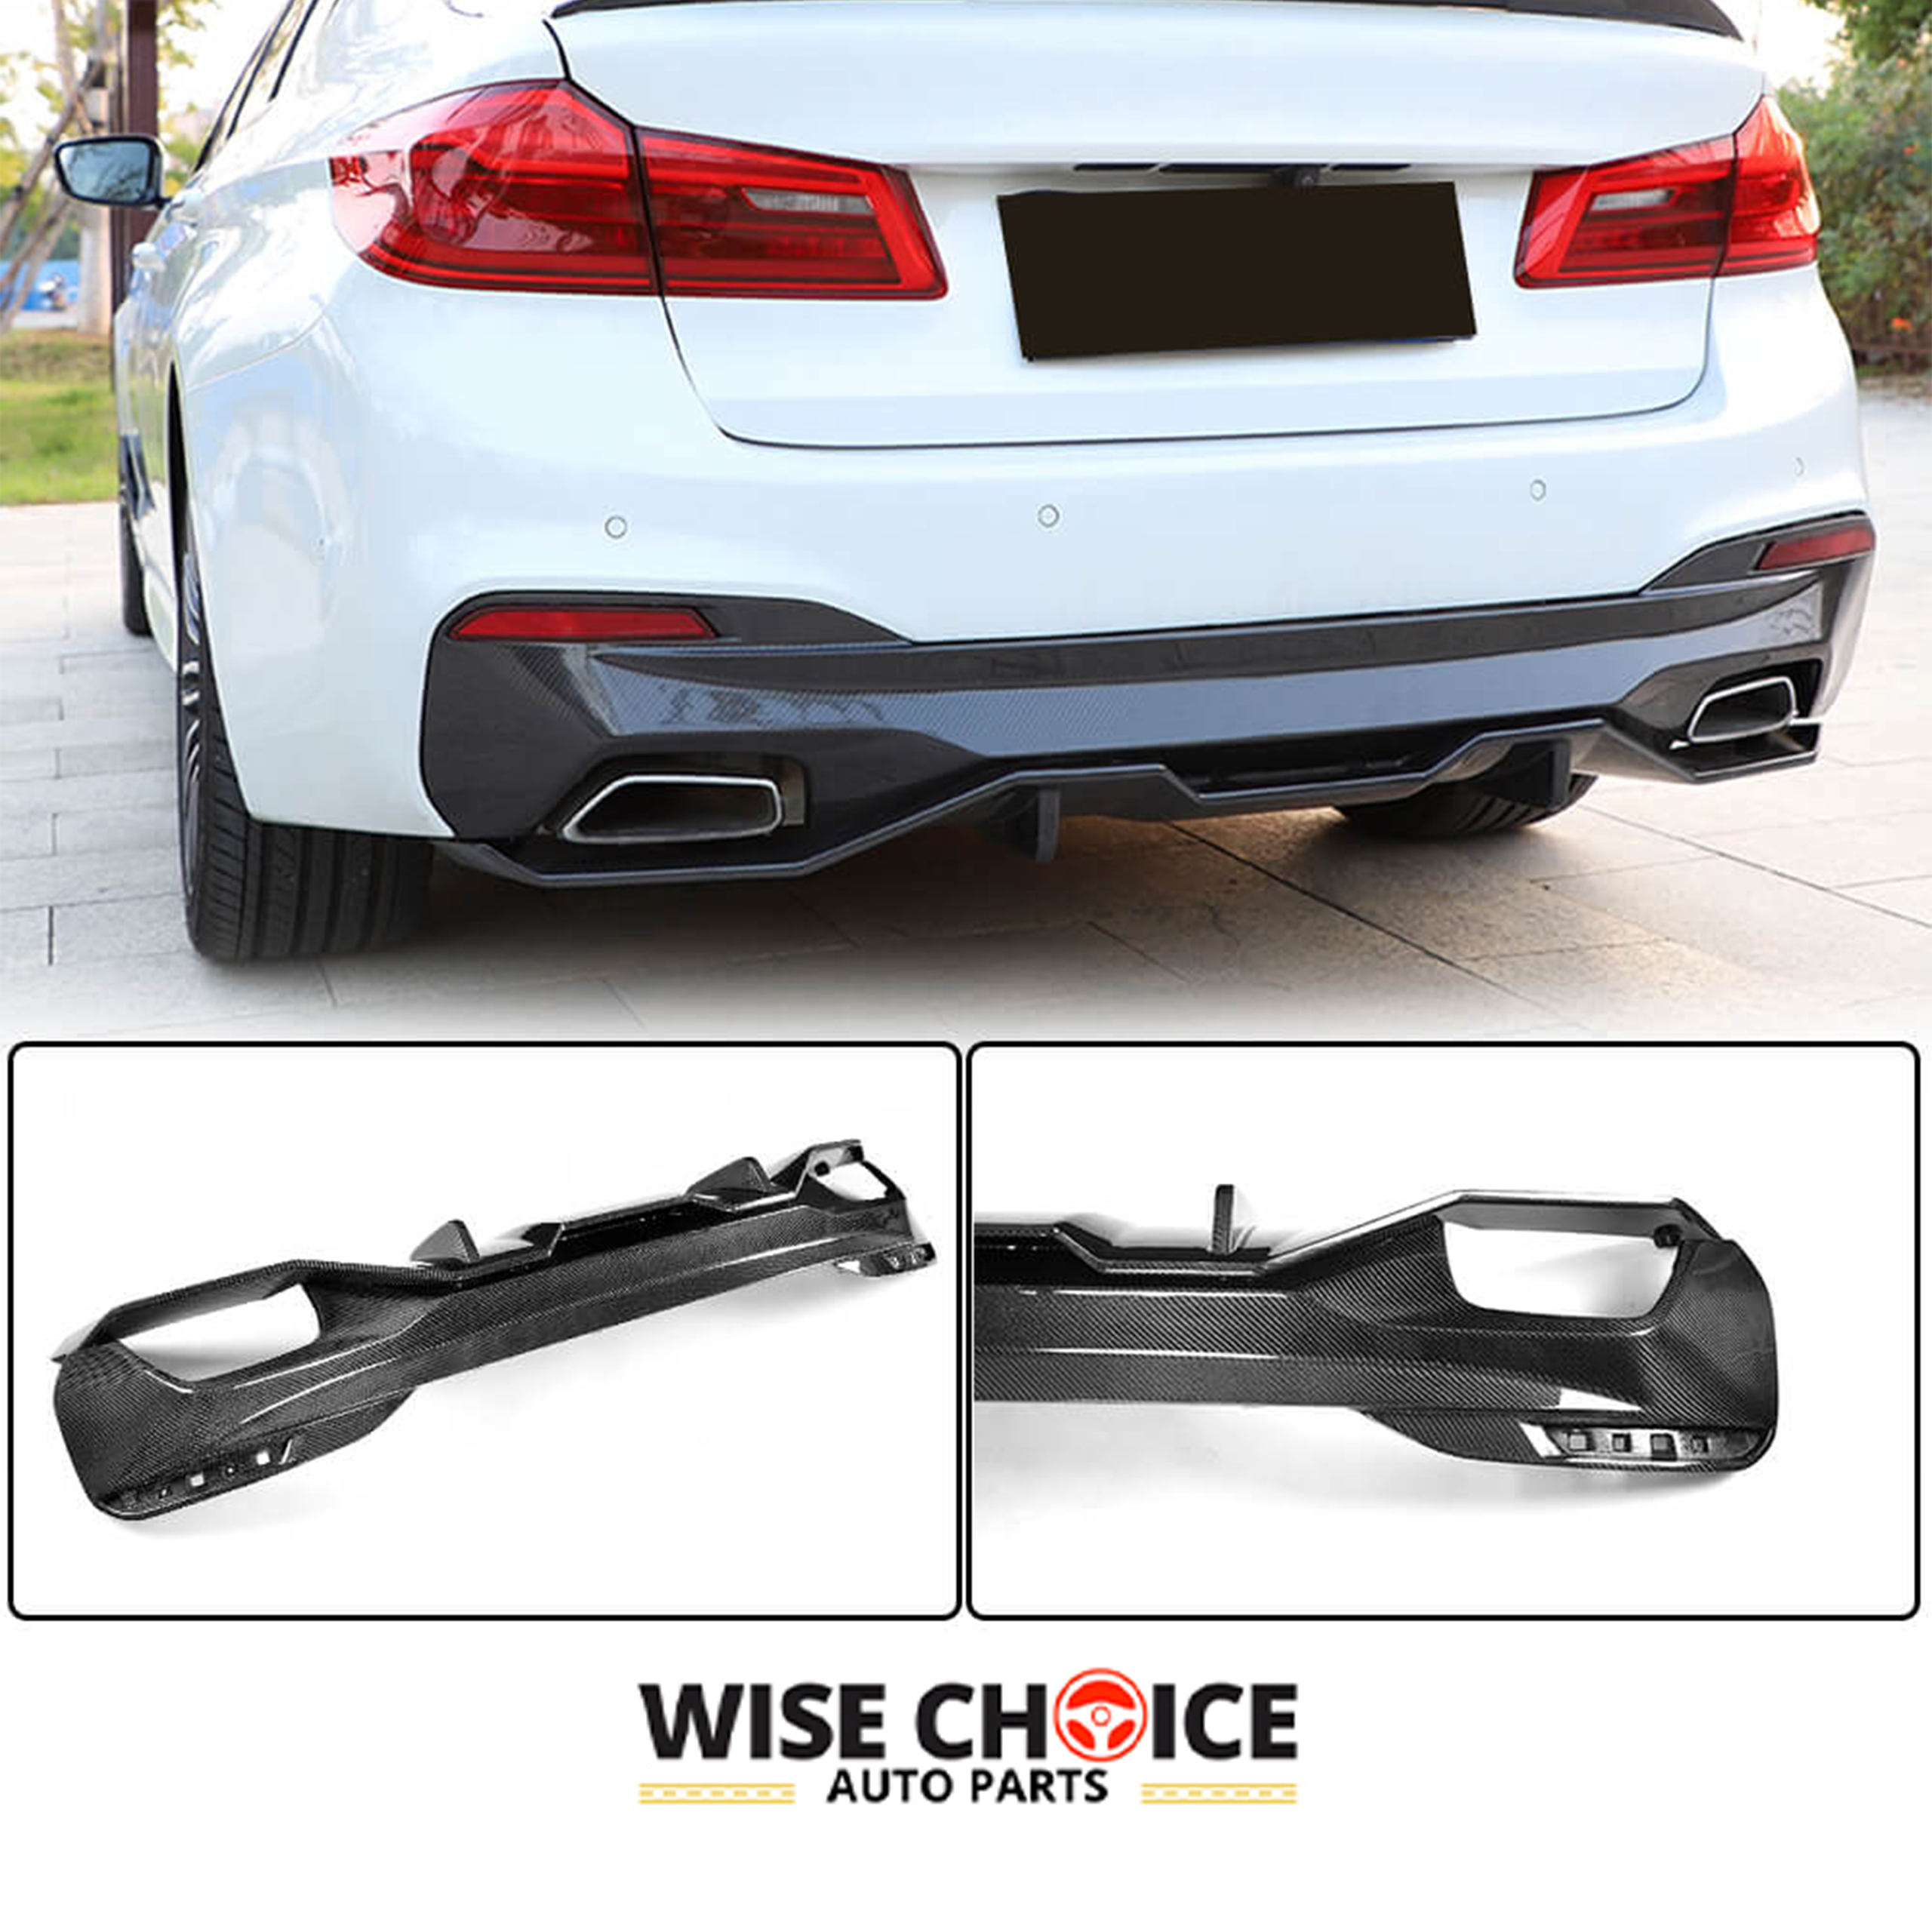 2021-2022 G30 BMW 5 Series with high-quality Carbon Fiber Rear Diffuser